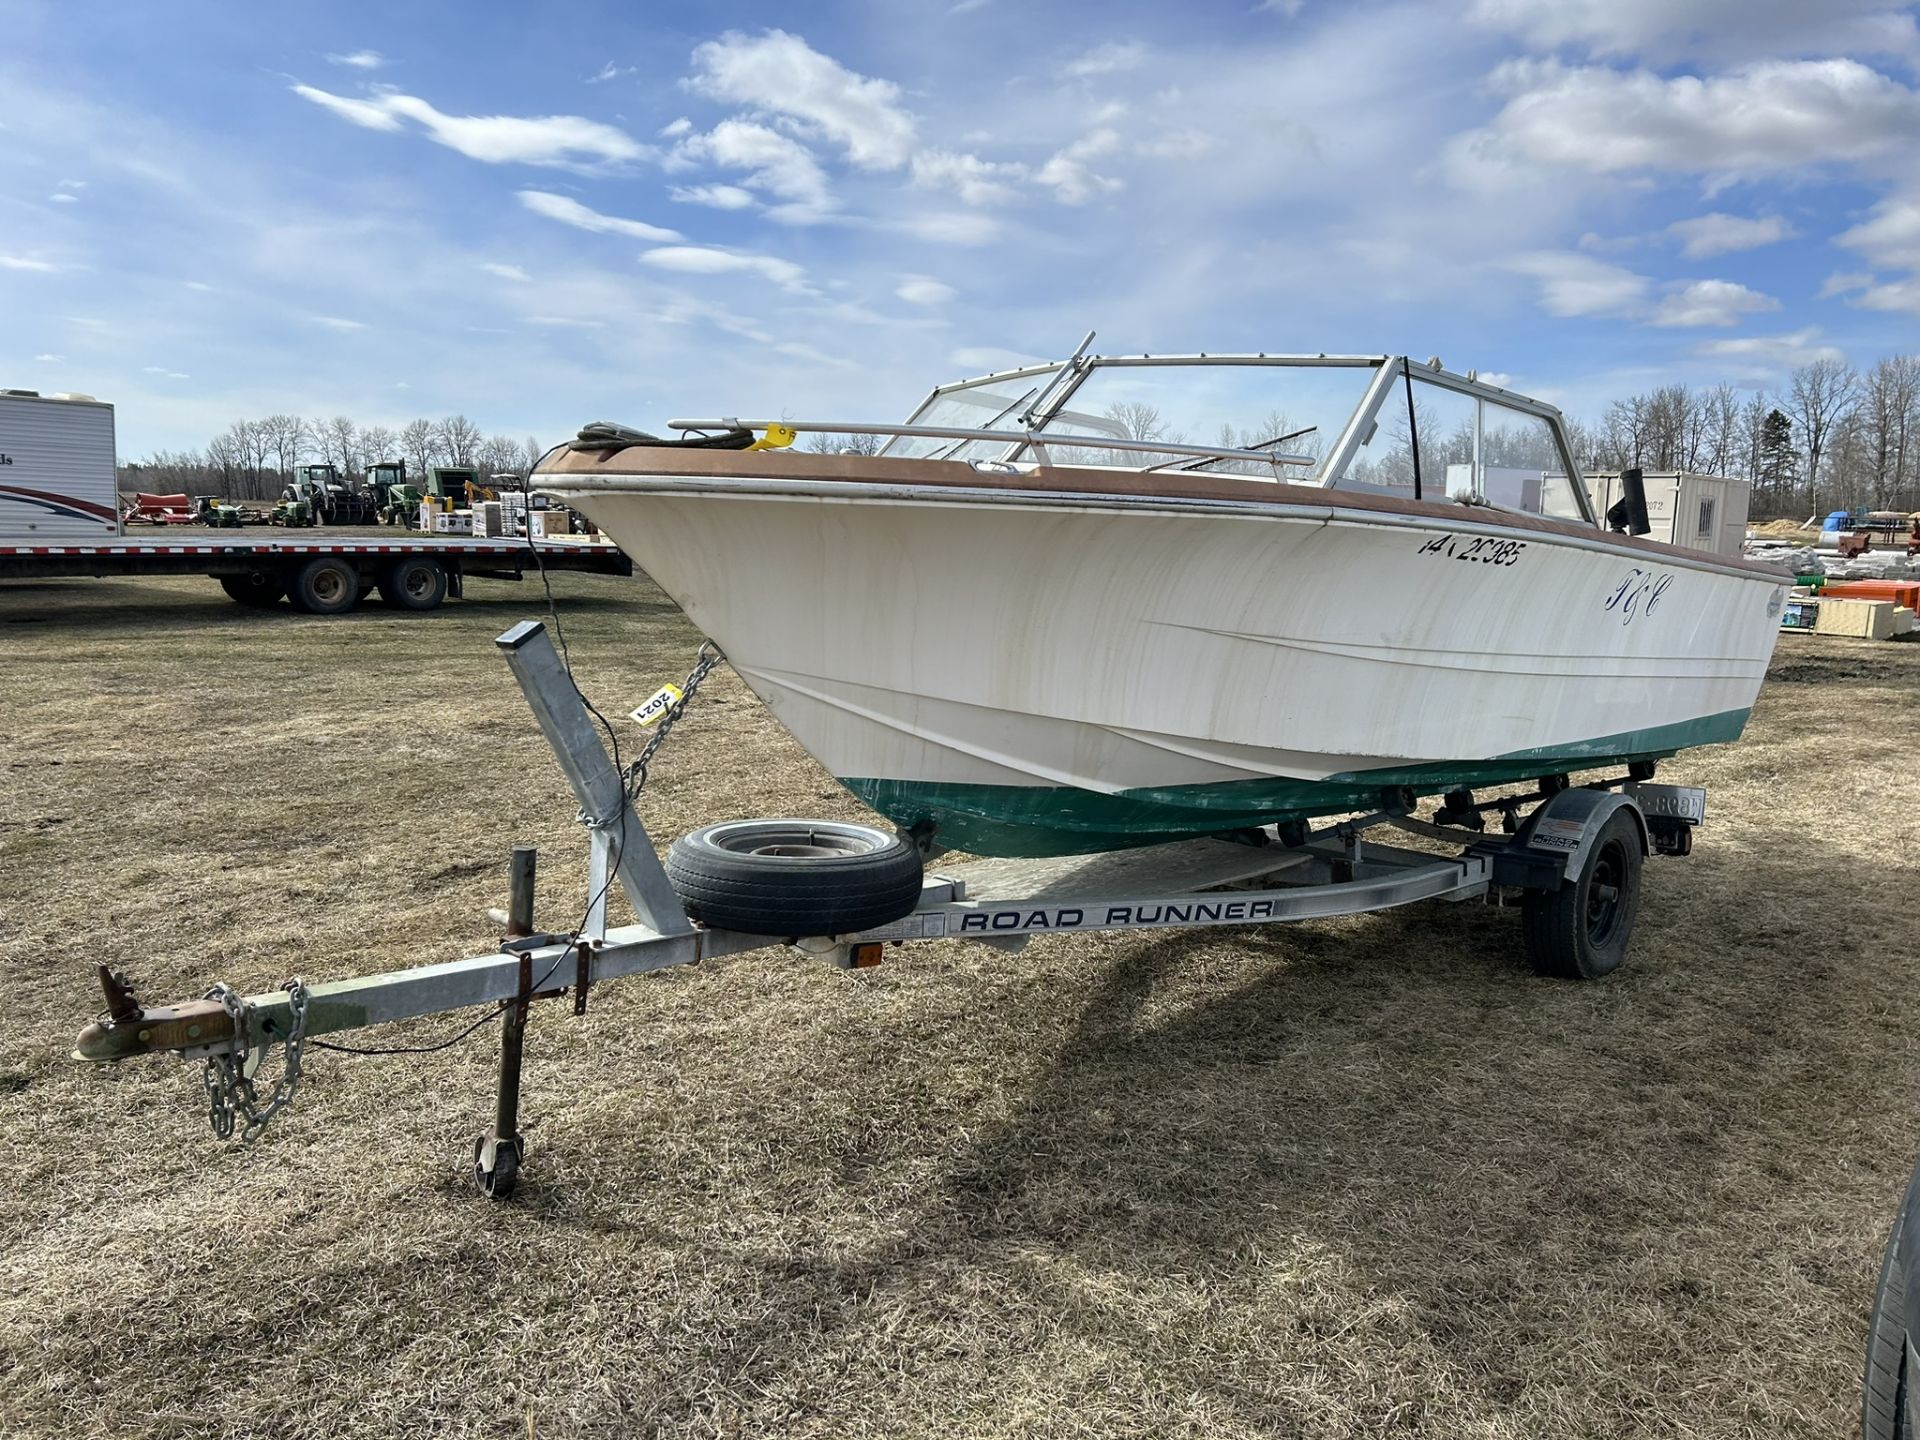 1973 DOUBLE EAGLE BOAT W/ 70 HP EVENRUDE & 10 HP CHRYSLER TROLLING MOTOR S/N ZBC039070677 AND 186 - Image 2 of 11